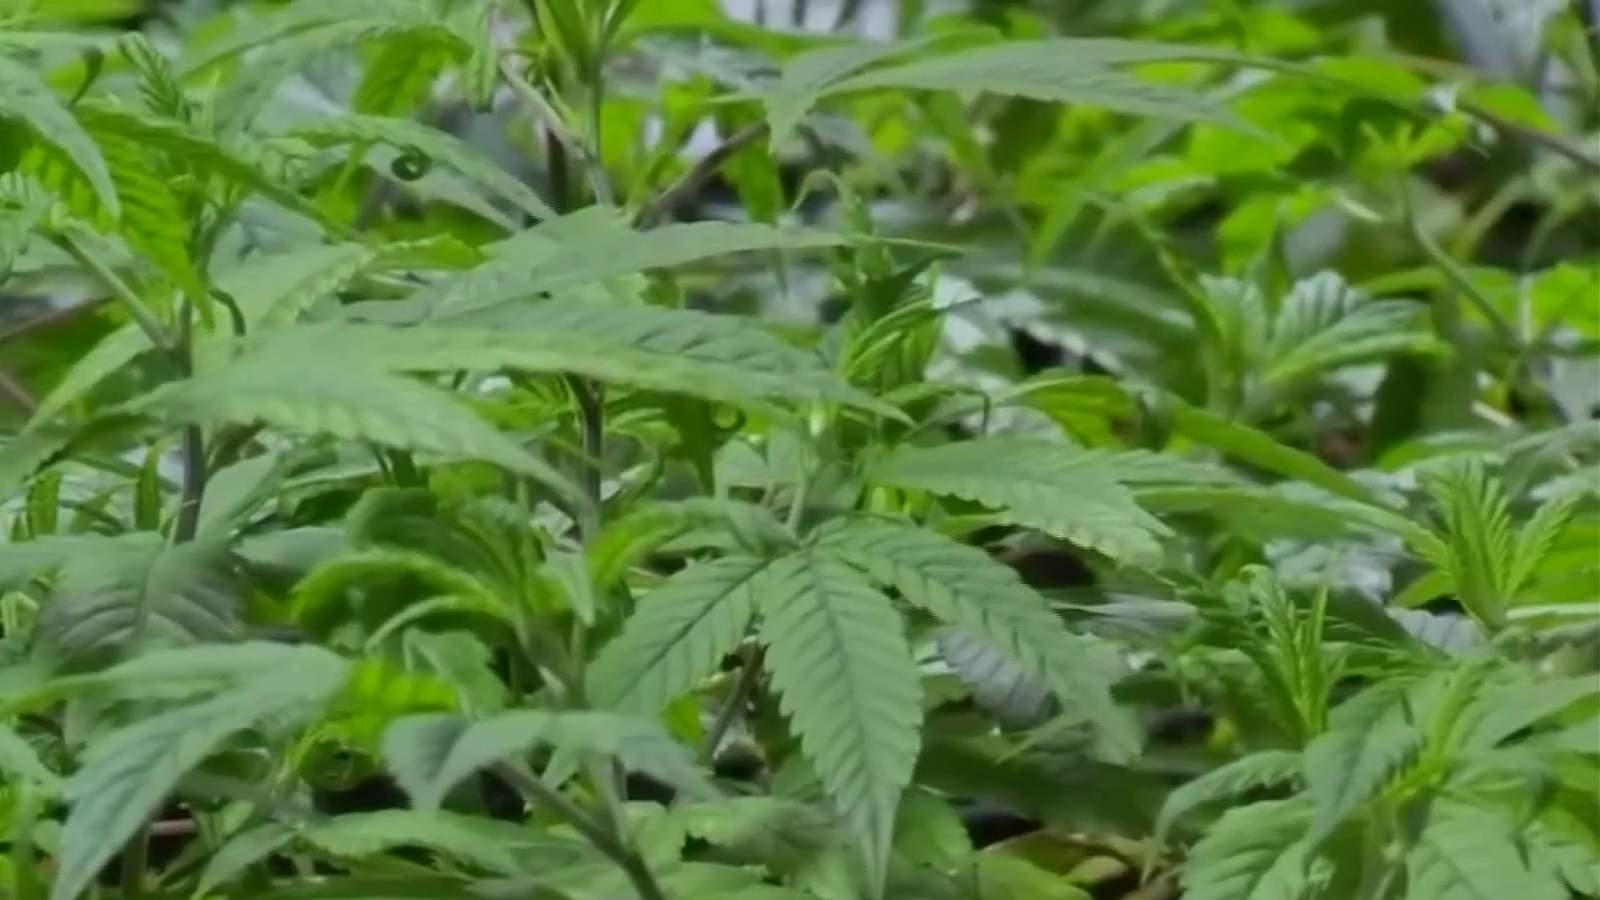 Authorities find about $1 million worth of marijuana at illegal grow operation in Detroit